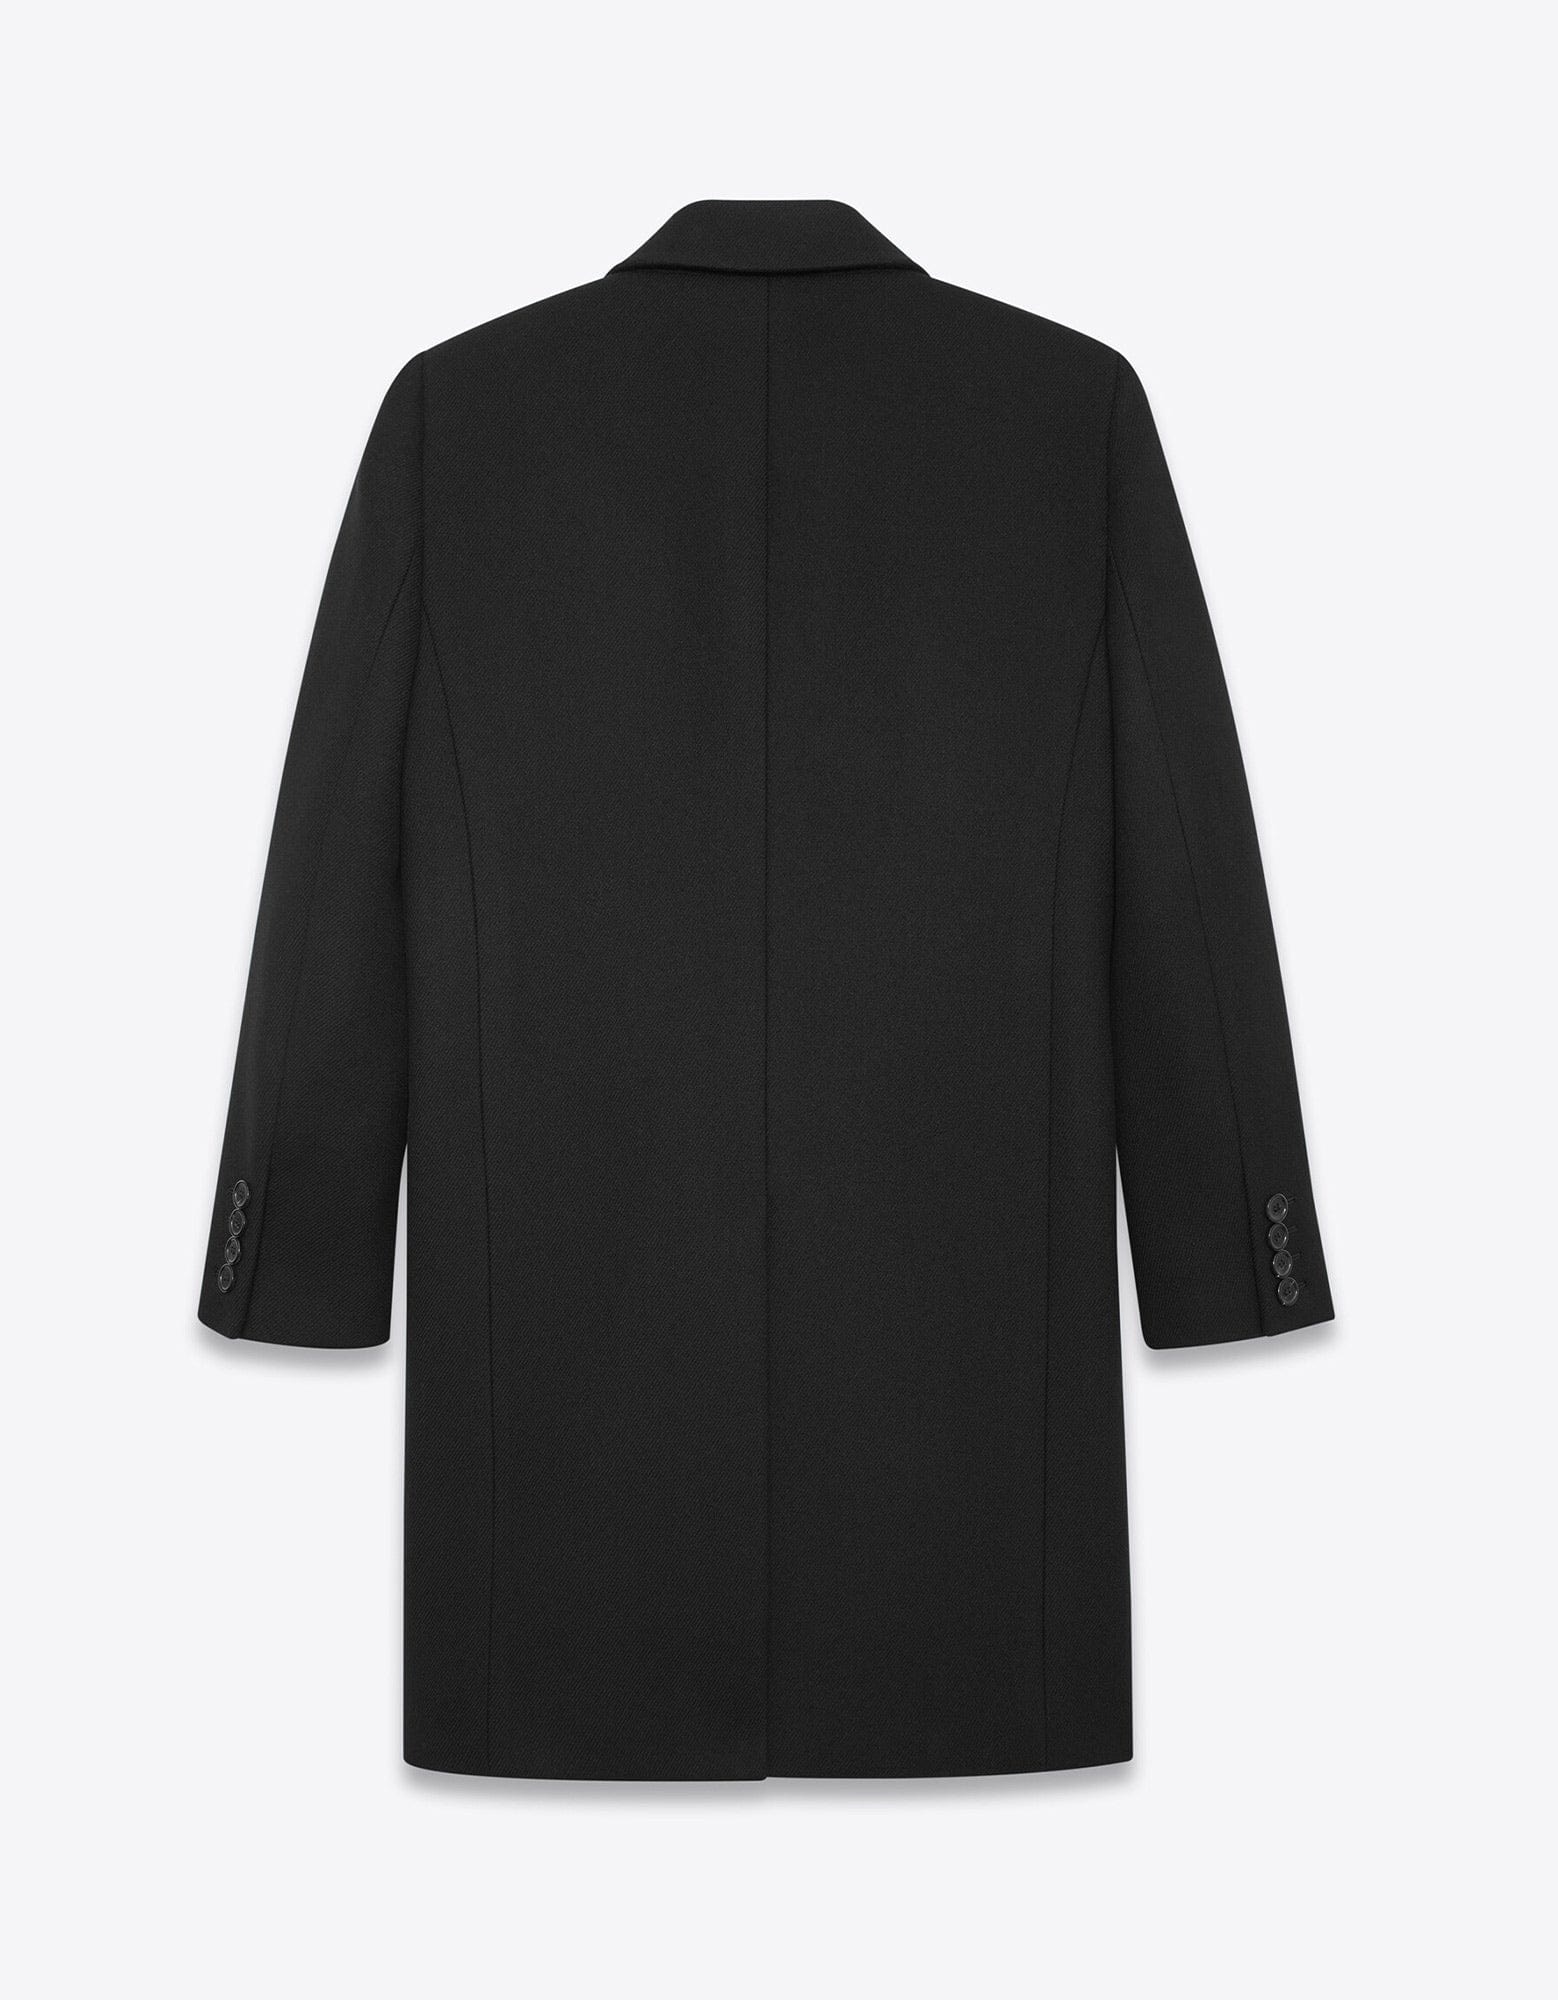 Black Double-Breasted Wool Coat - 2